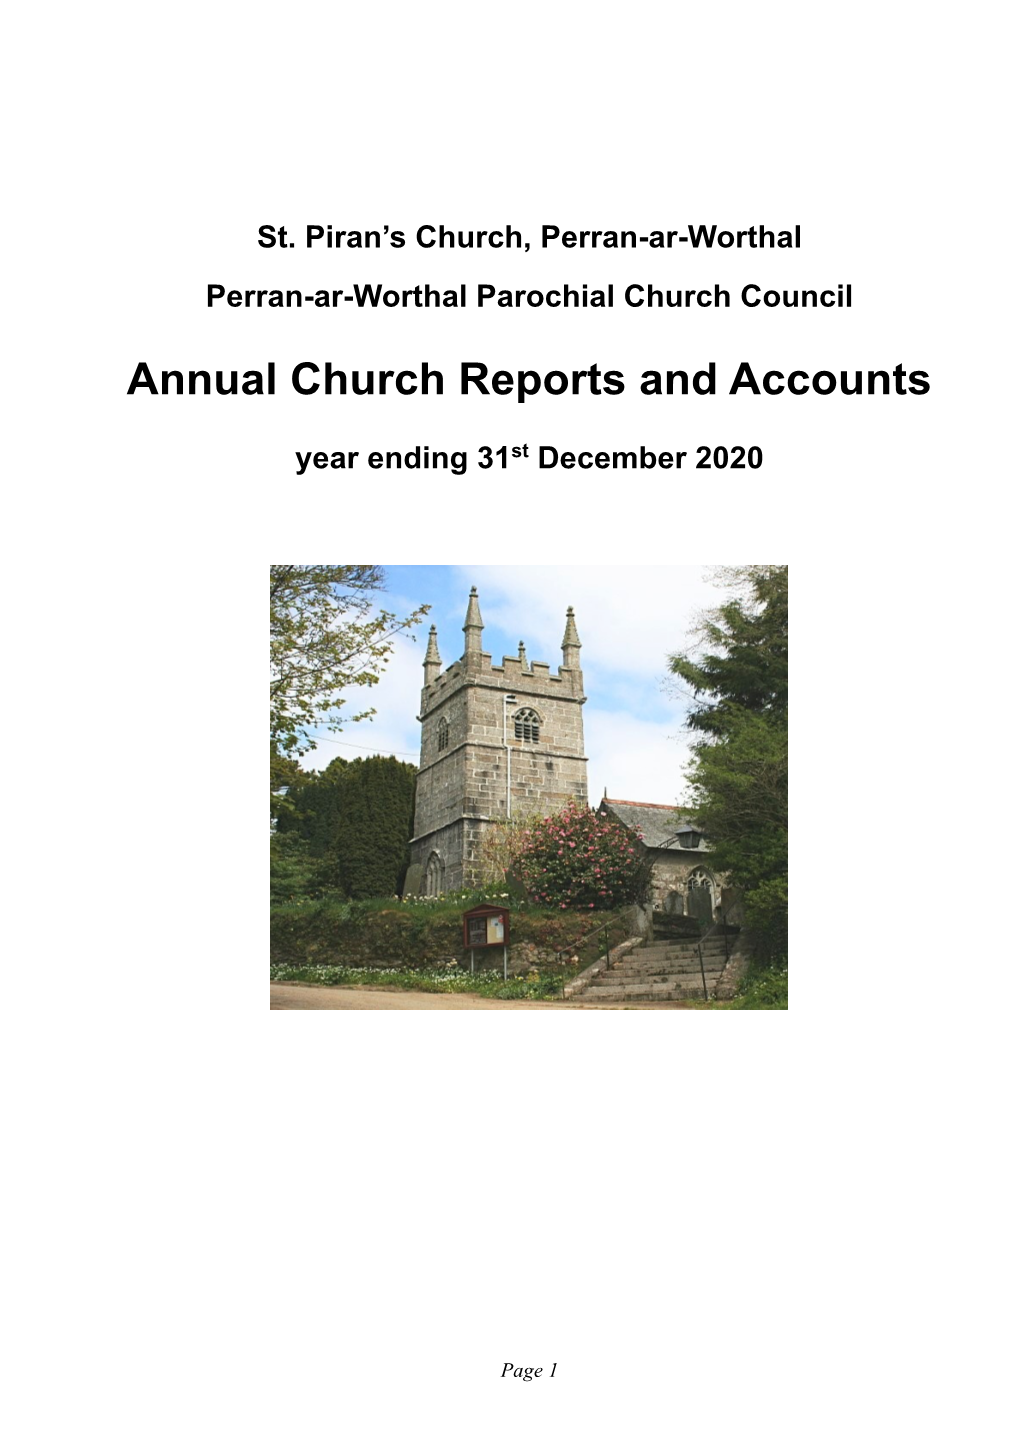 Annual Church Reports and Accounts